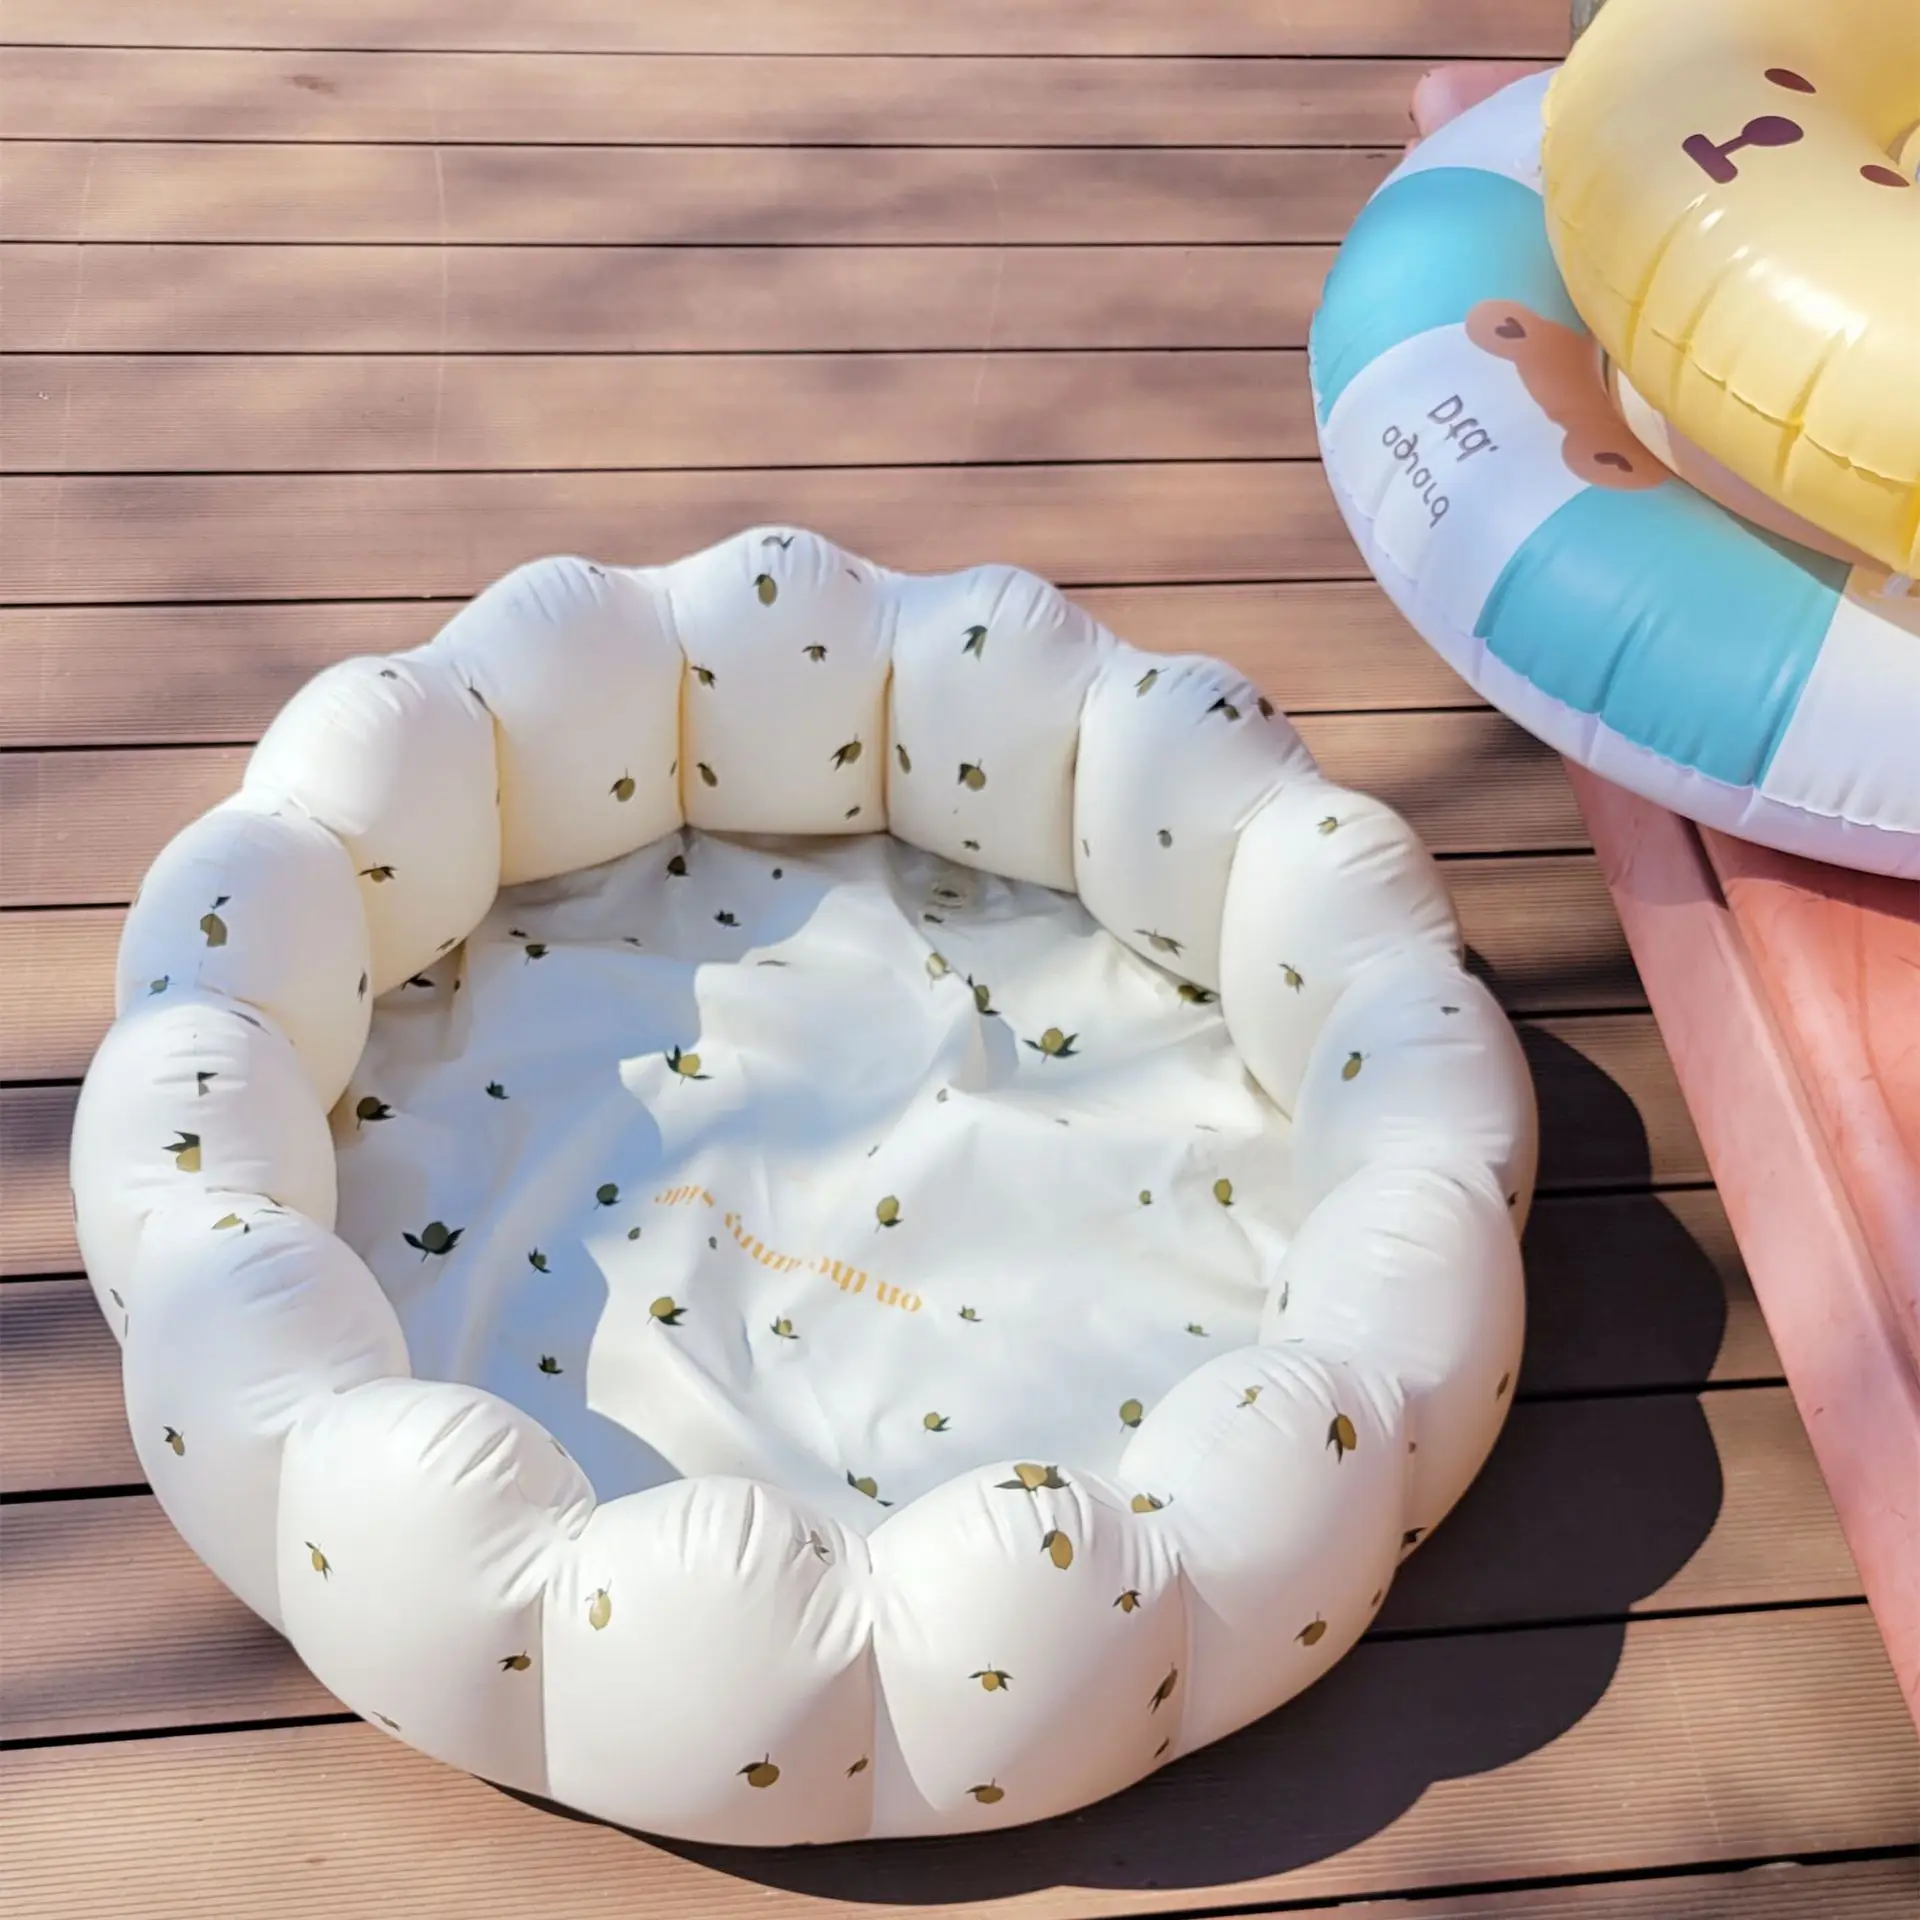 Foldable Inflatable Petal Baby Swimming Pool Household Outdoor Paddling Pool Soft PVC Round Colorful Balls Fence Play Space Room